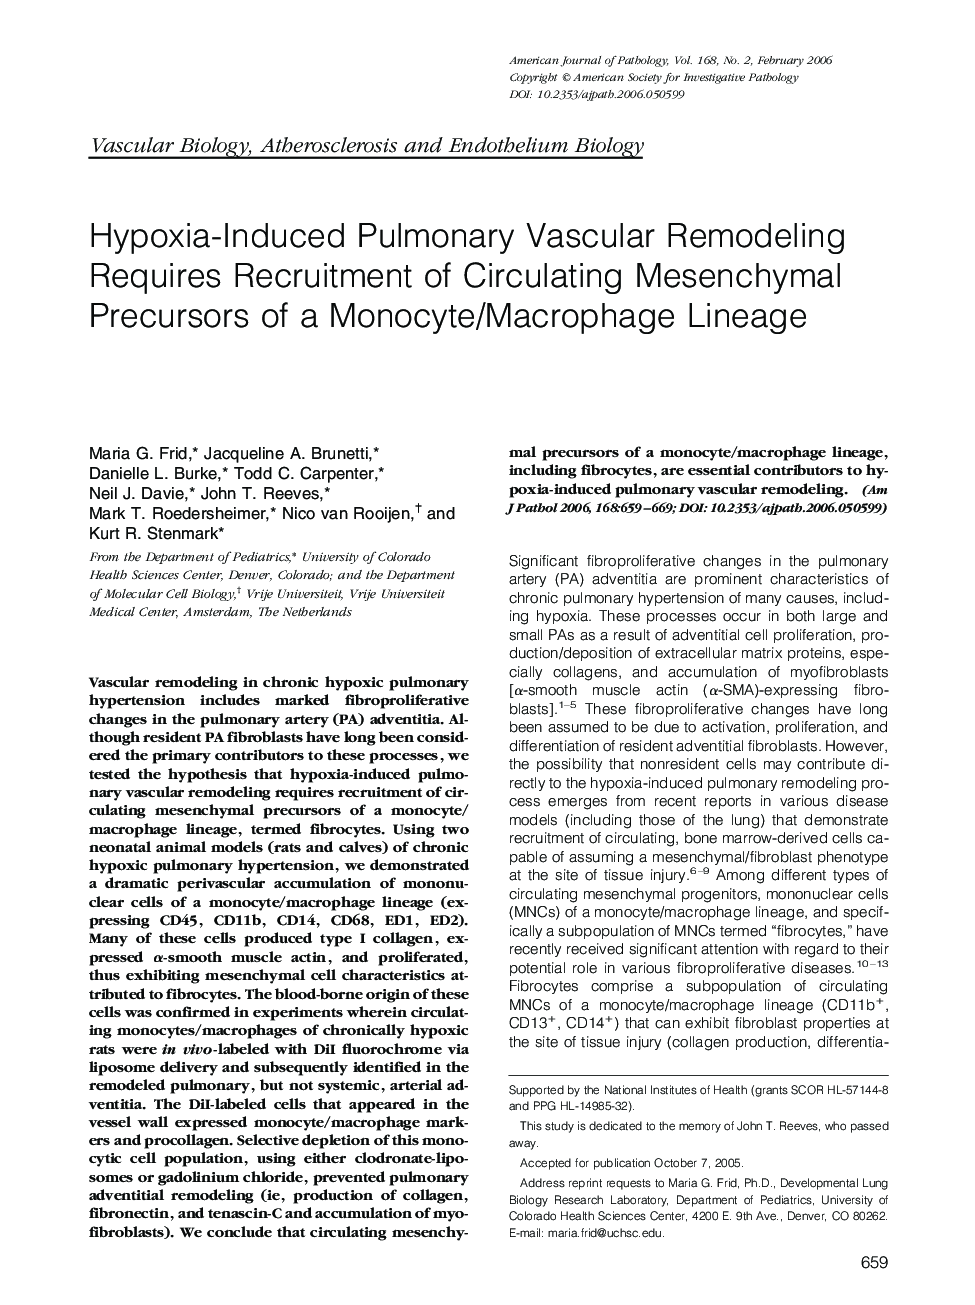 Regular ArticlesHypoxia-Induced Pulmonary Vascular Remodeling Requires Recruitment of Circulating Mesenchymal Precursors of a Monocyte/Macrophage Lineage